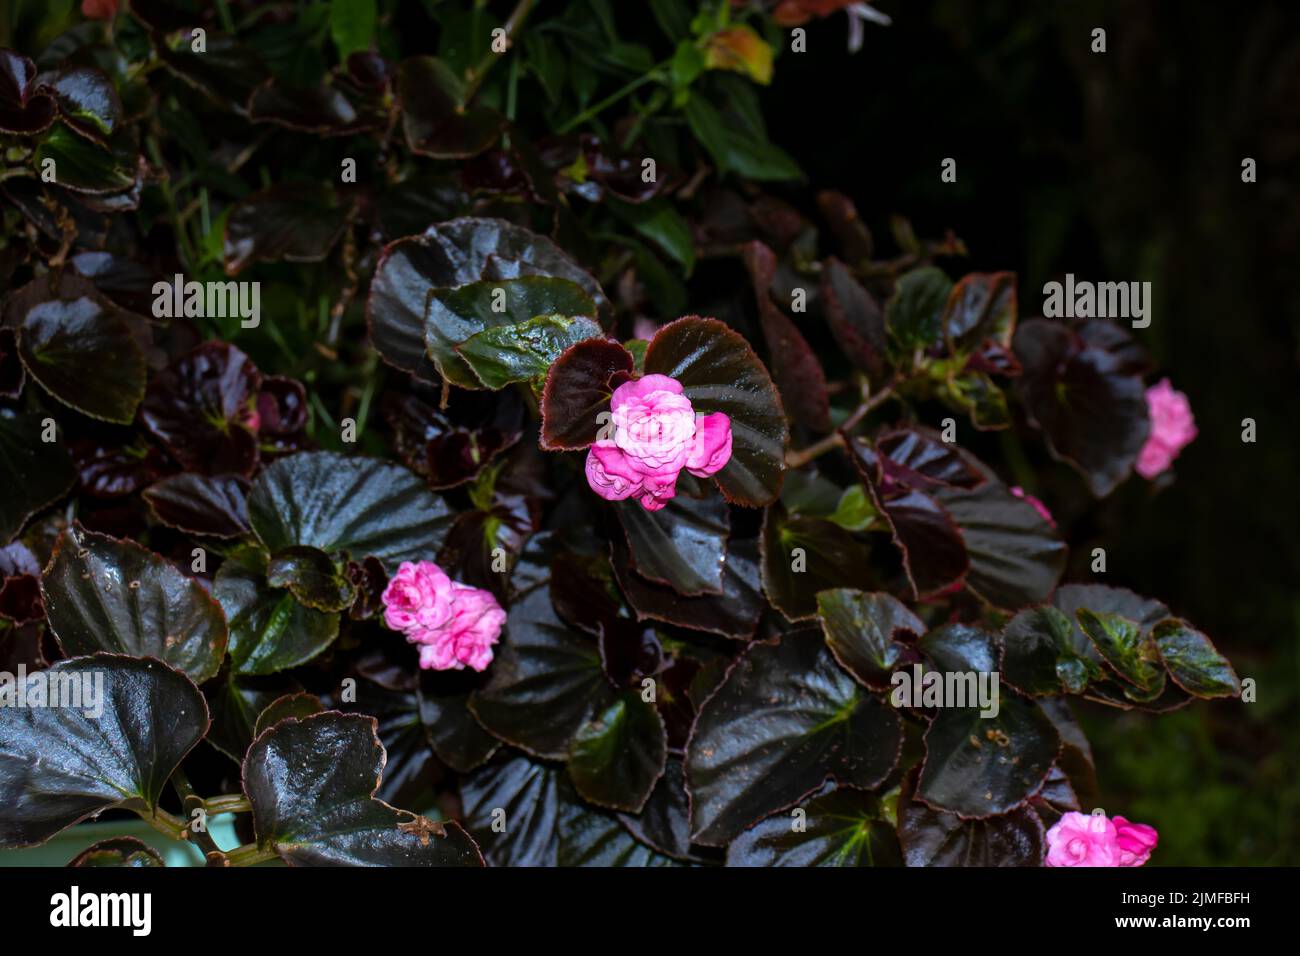 A closeup shot of beautiful Begonia flower species with pink petals on a dark bush Stock Photo